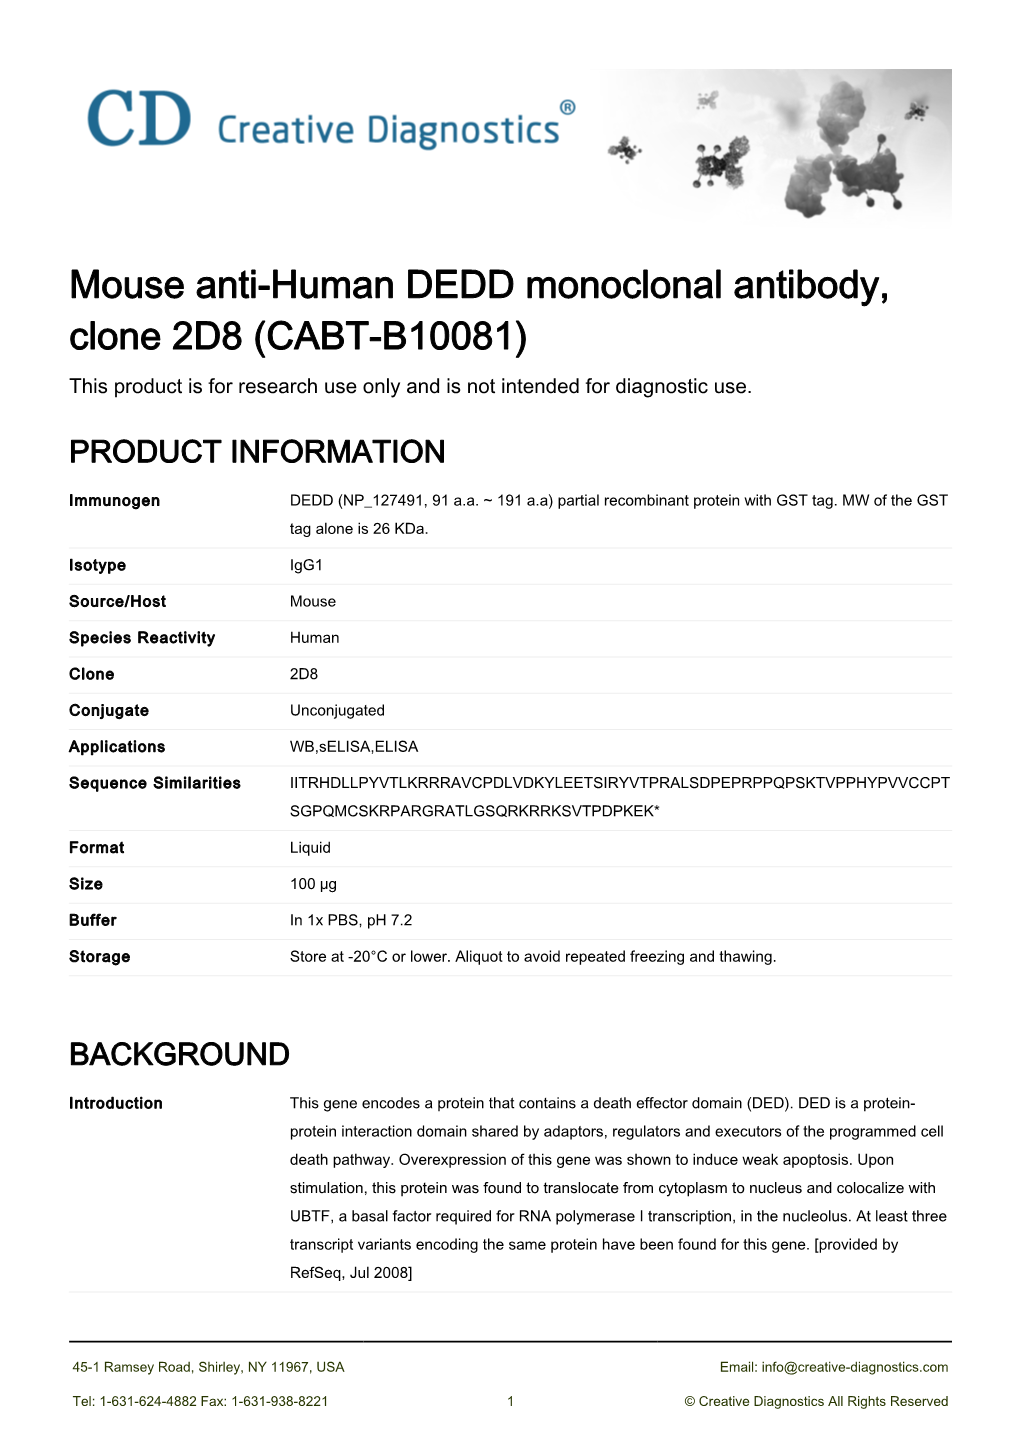 Mouse Anti-Human DEDD Monoclonal Antibody, Clone 2D8 (CABT-B10081) This Product Is for Research Use Only and Is Not Intended for Diagnostic Use